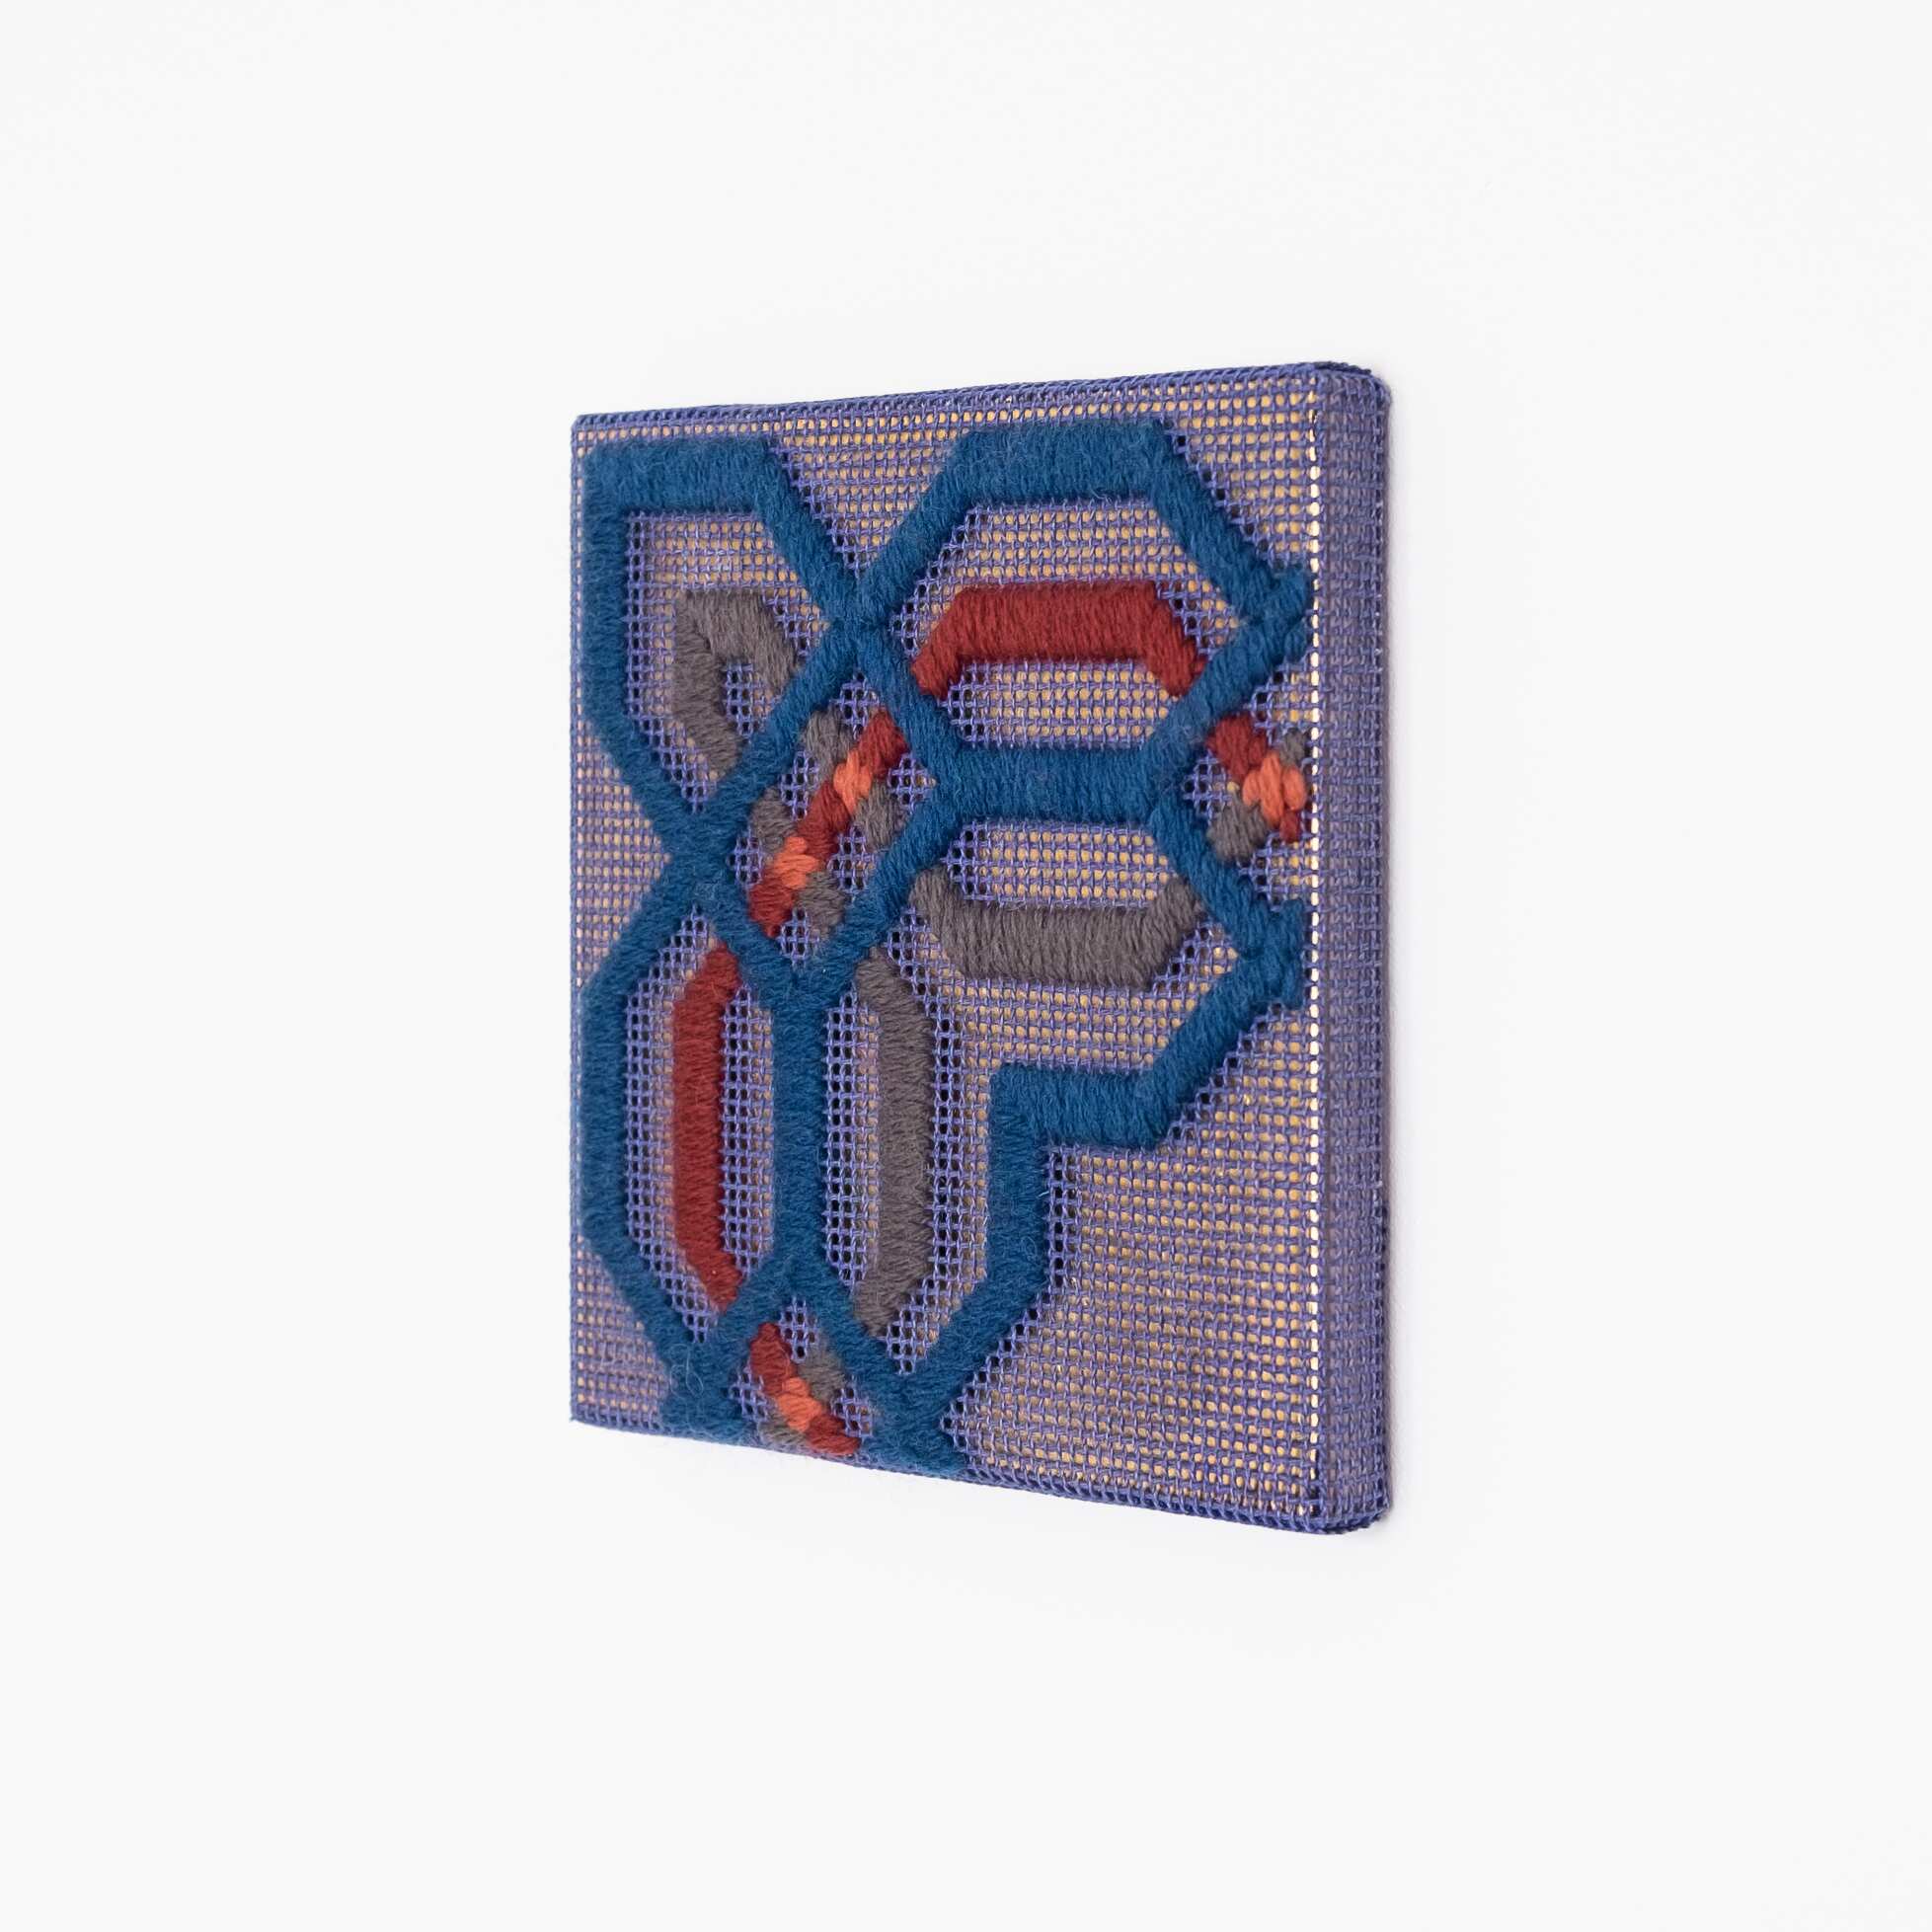 Border fragment [blue-grey-red on blue], Hand-embroidered wool thread and acrylic paint on canvas over gilded panel, 2021